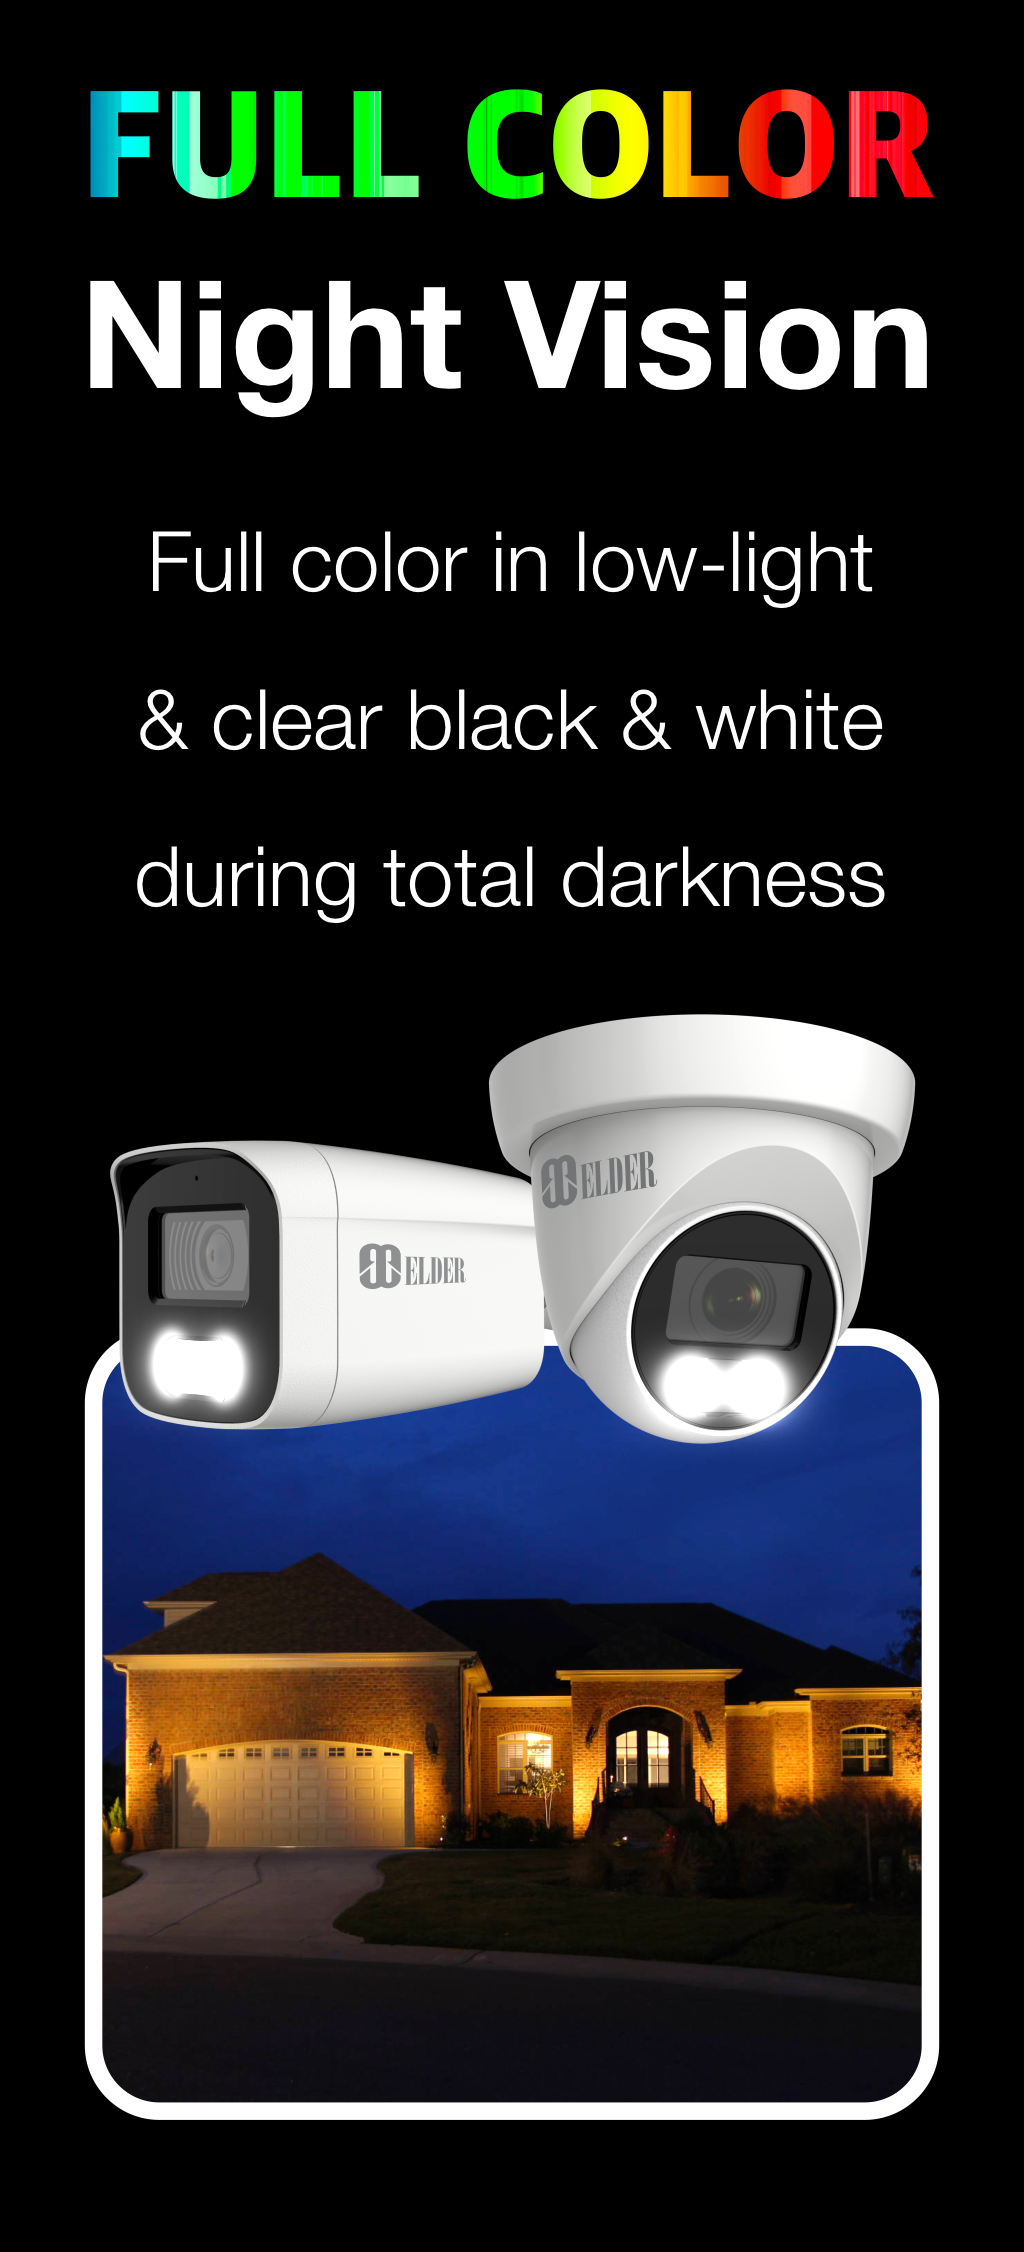 Elder security camera system color night vision features warm light night vision. Full-color in extremely low-light and clear black and white in total darkness.